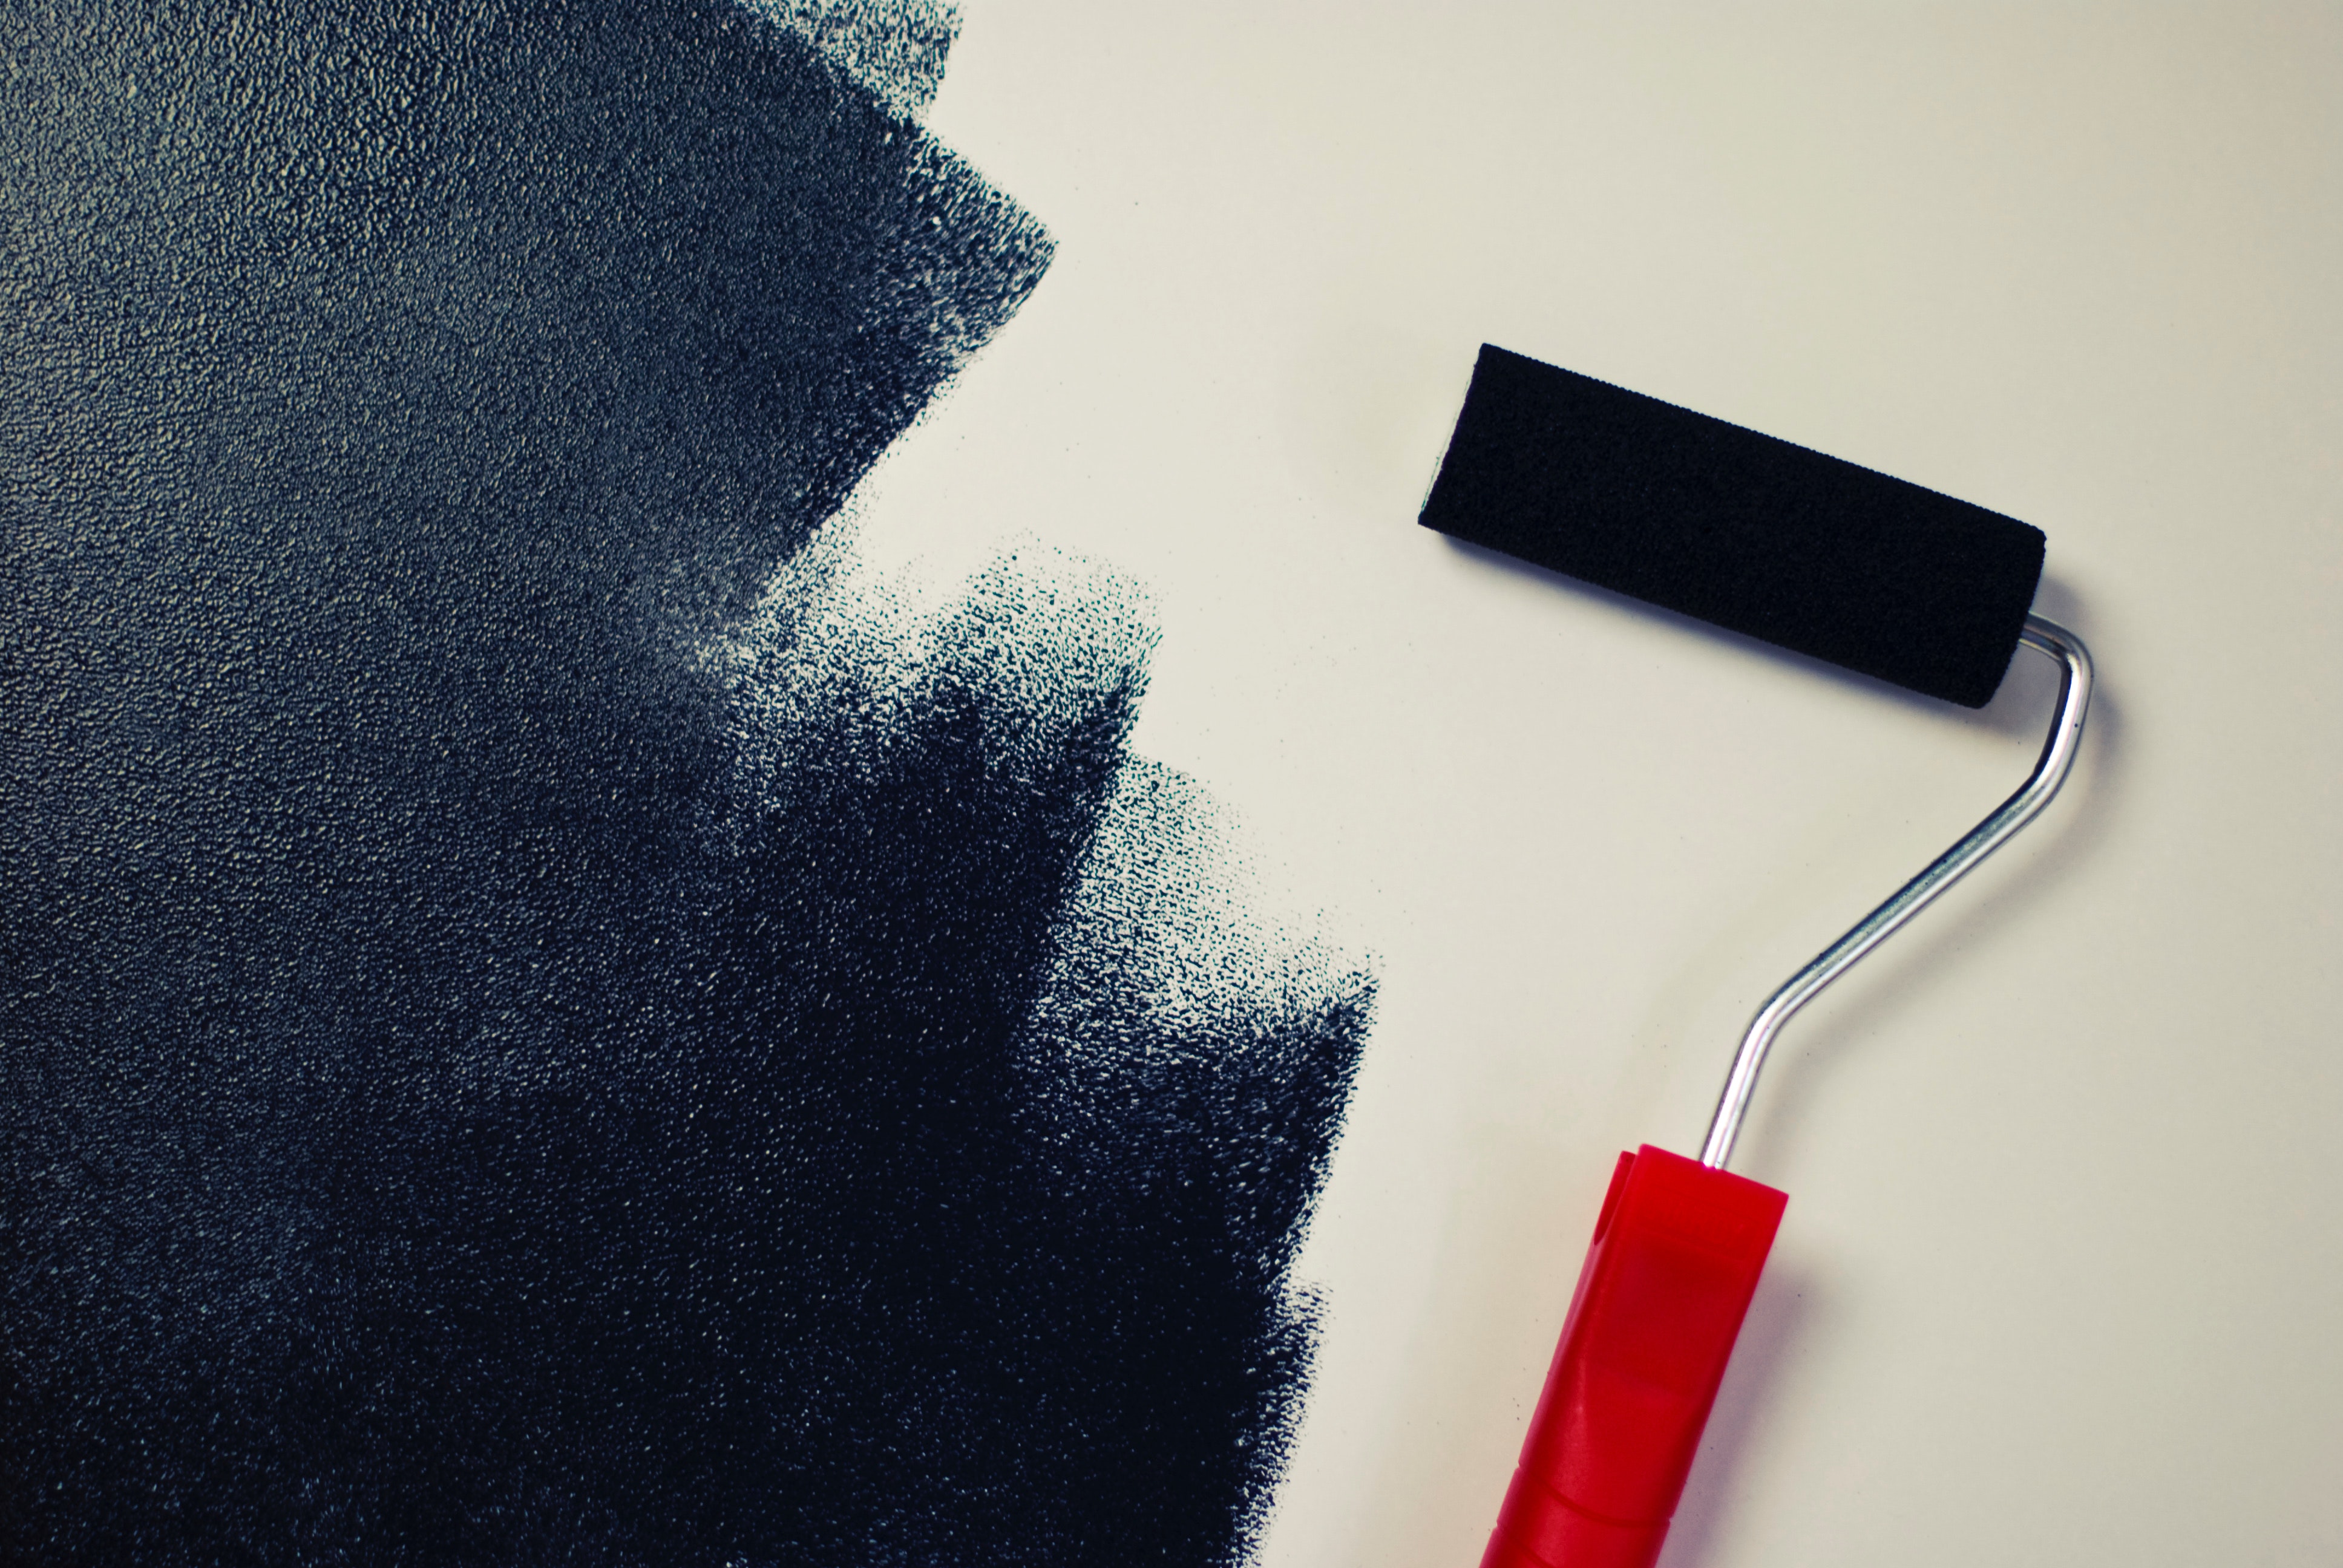 Find answers to your paint color questions.